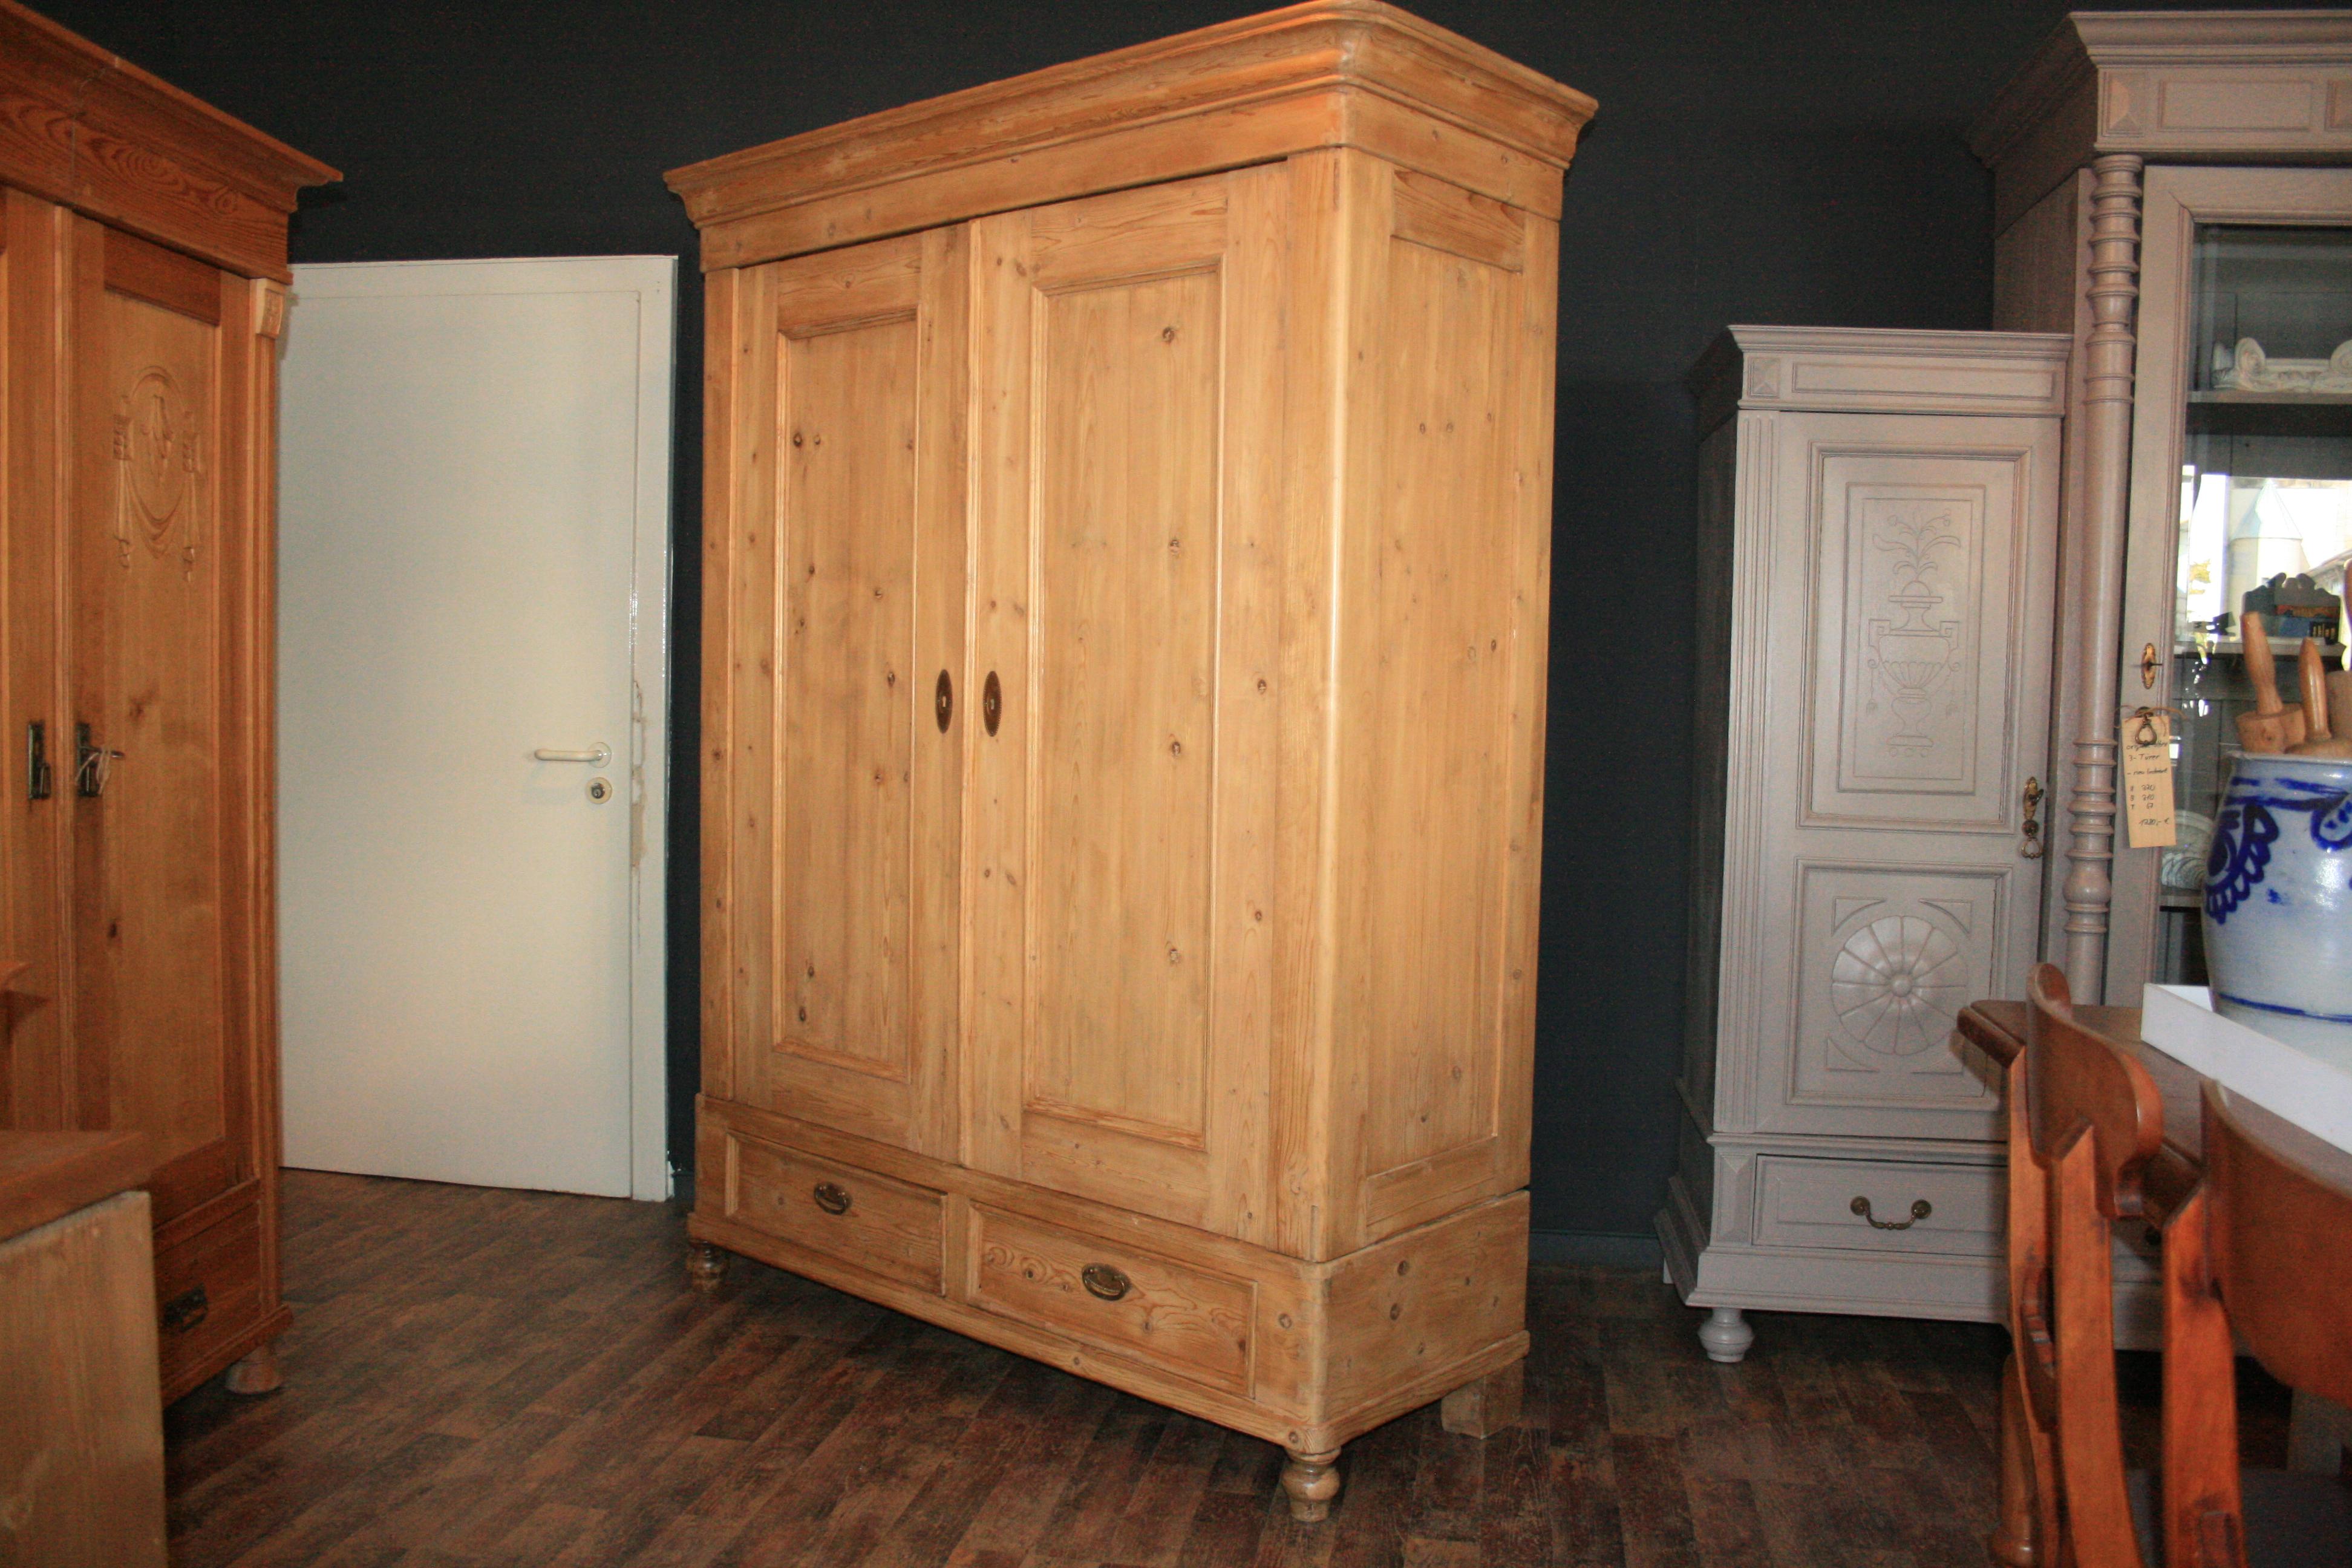 Early 20th Century Art Nouveau Wardrobe Made of Fir Wood, 1900s